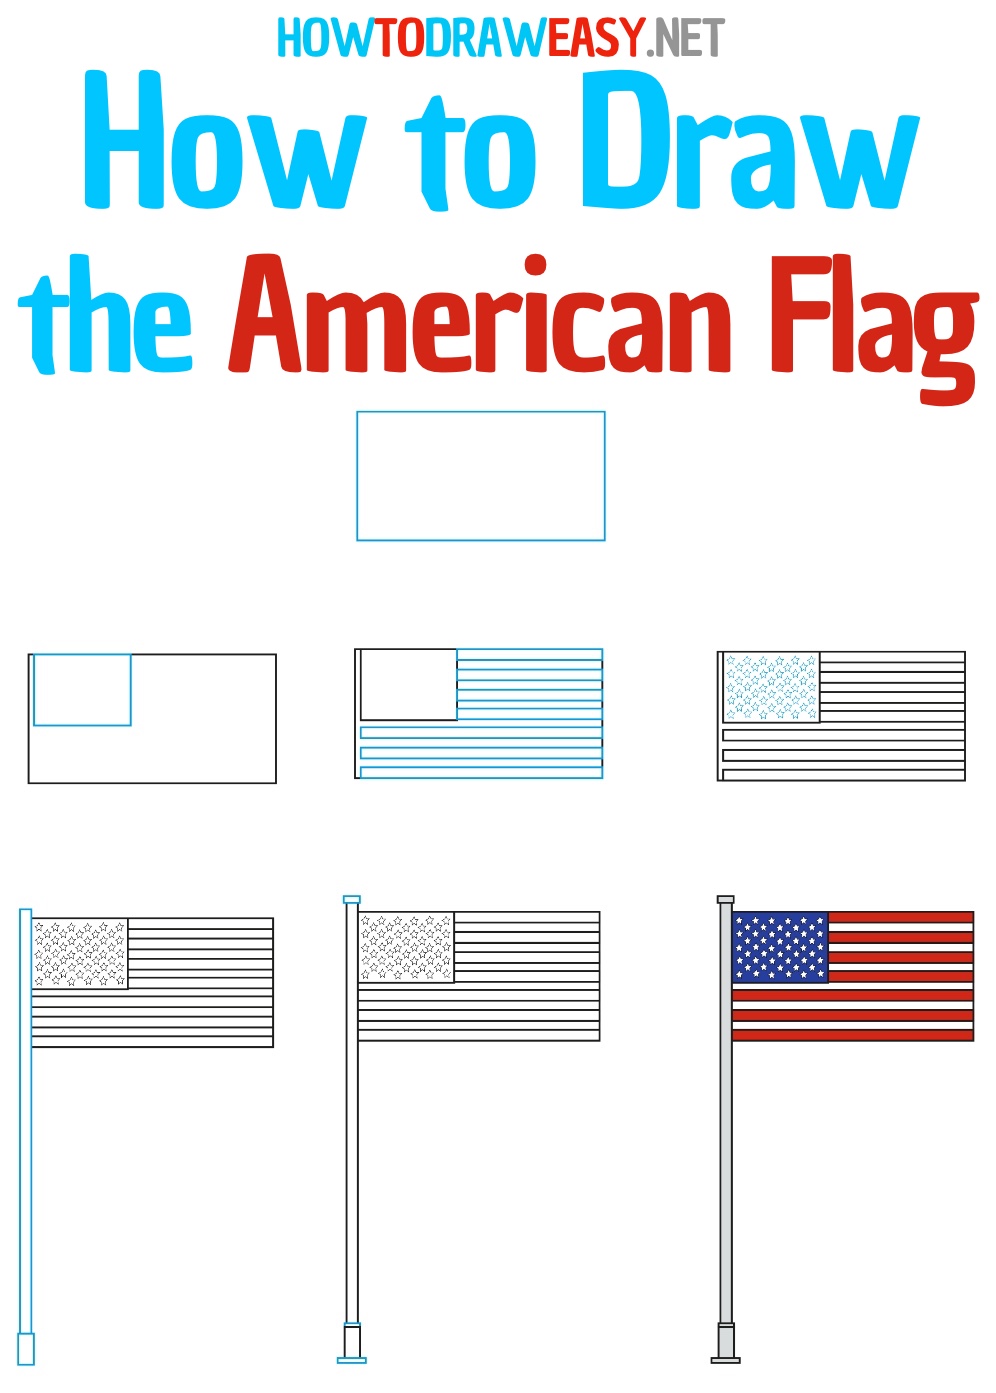 How to Draw the American Flag Step by Step